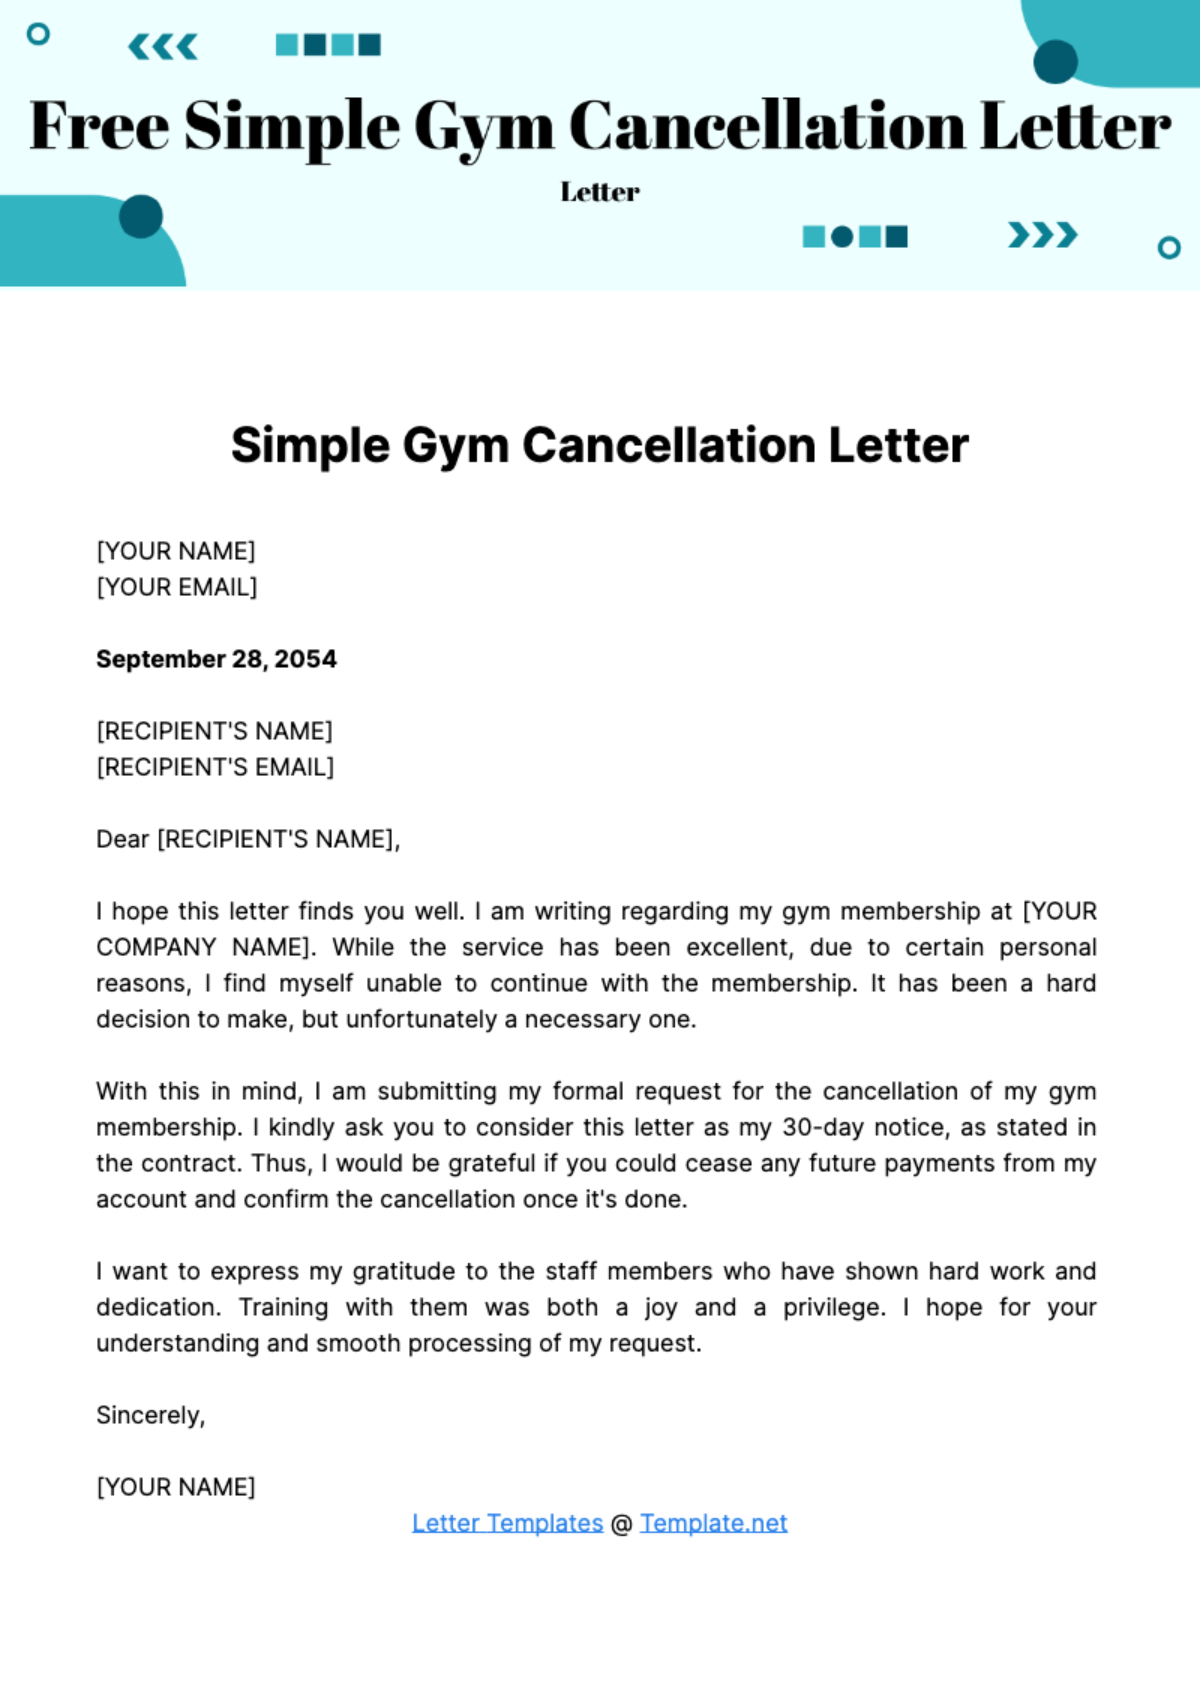 Free Simple Gym Cancellation Letter Template